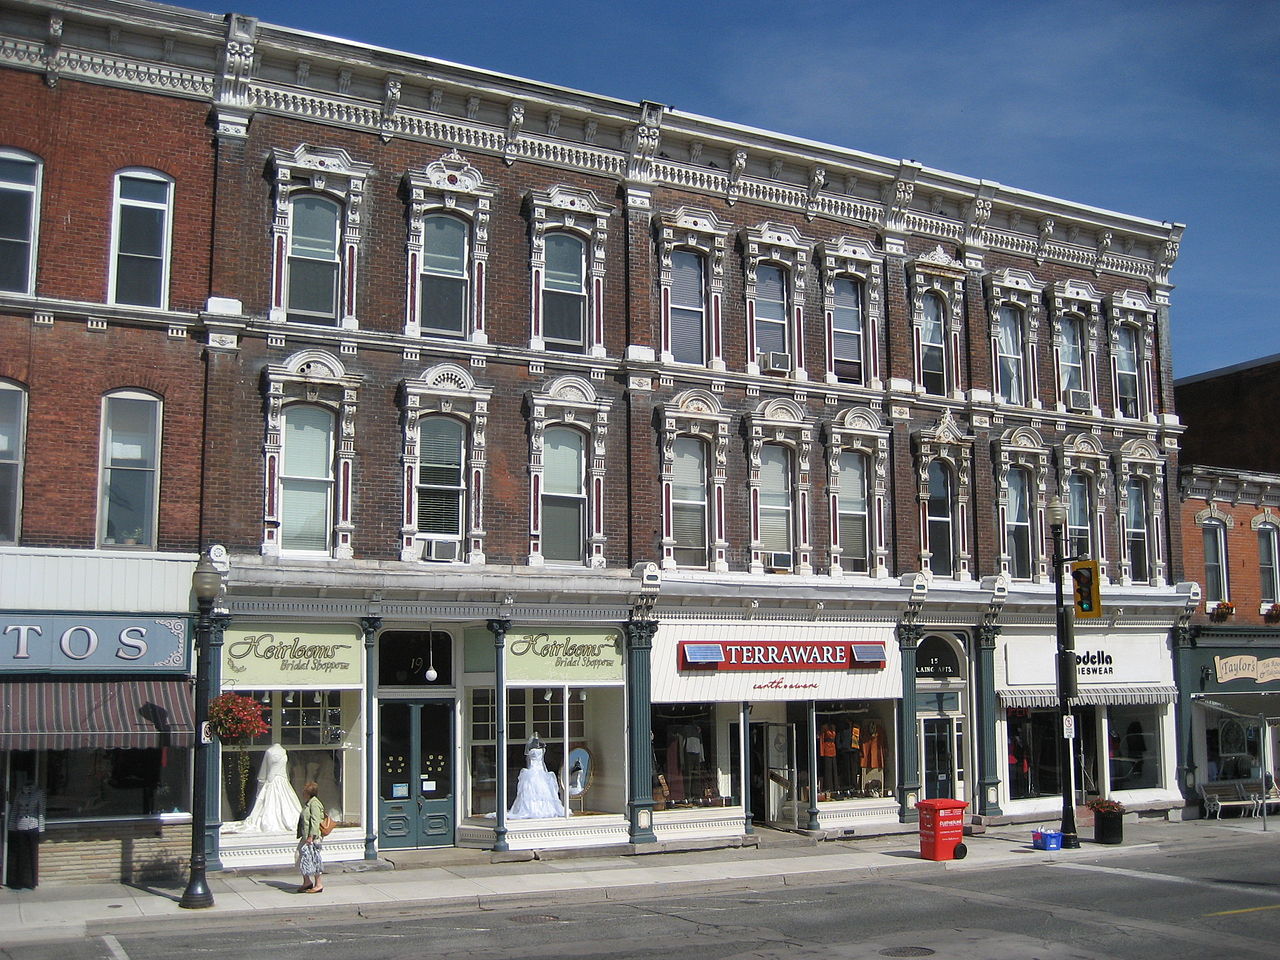 King Street West has a quiet and dignified air (Image Credit: Wikimedia).